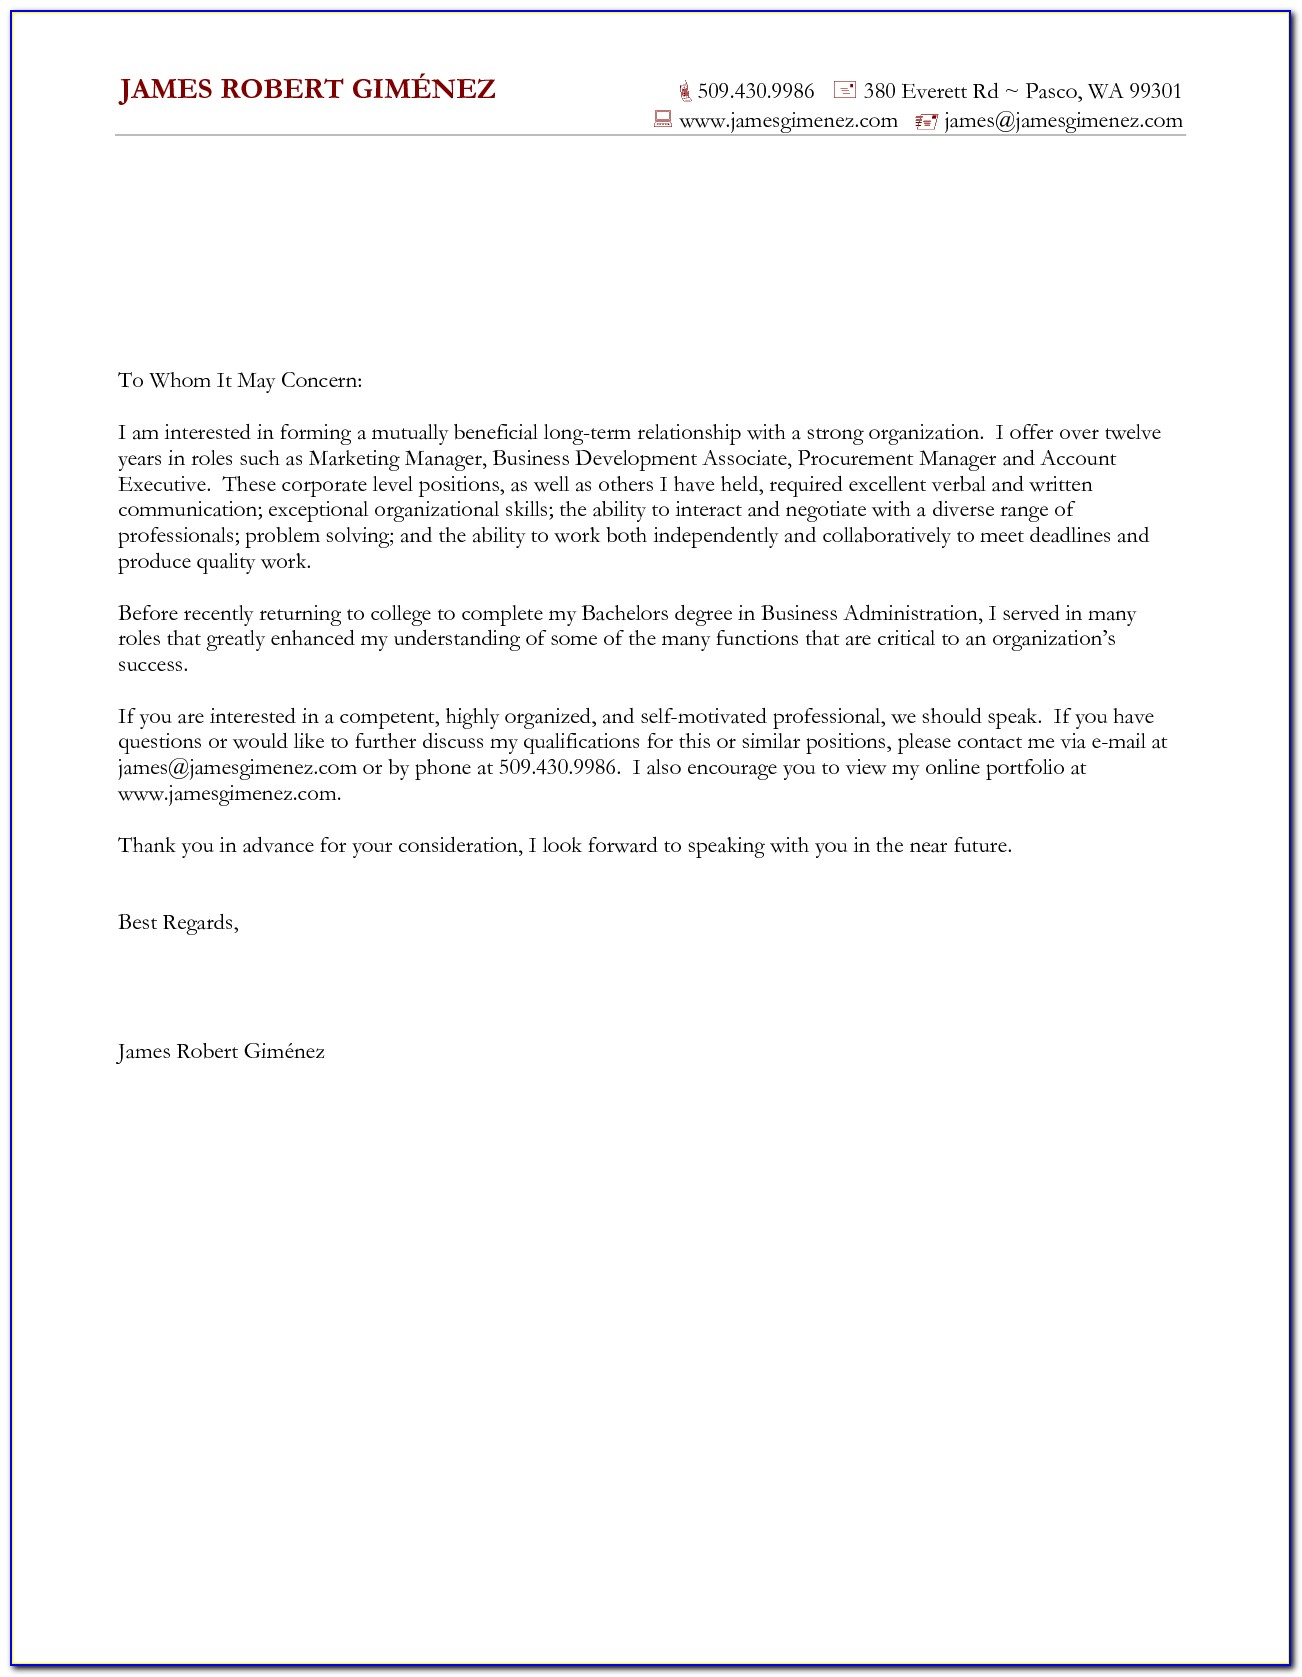 General Job Application Cover Letter Example